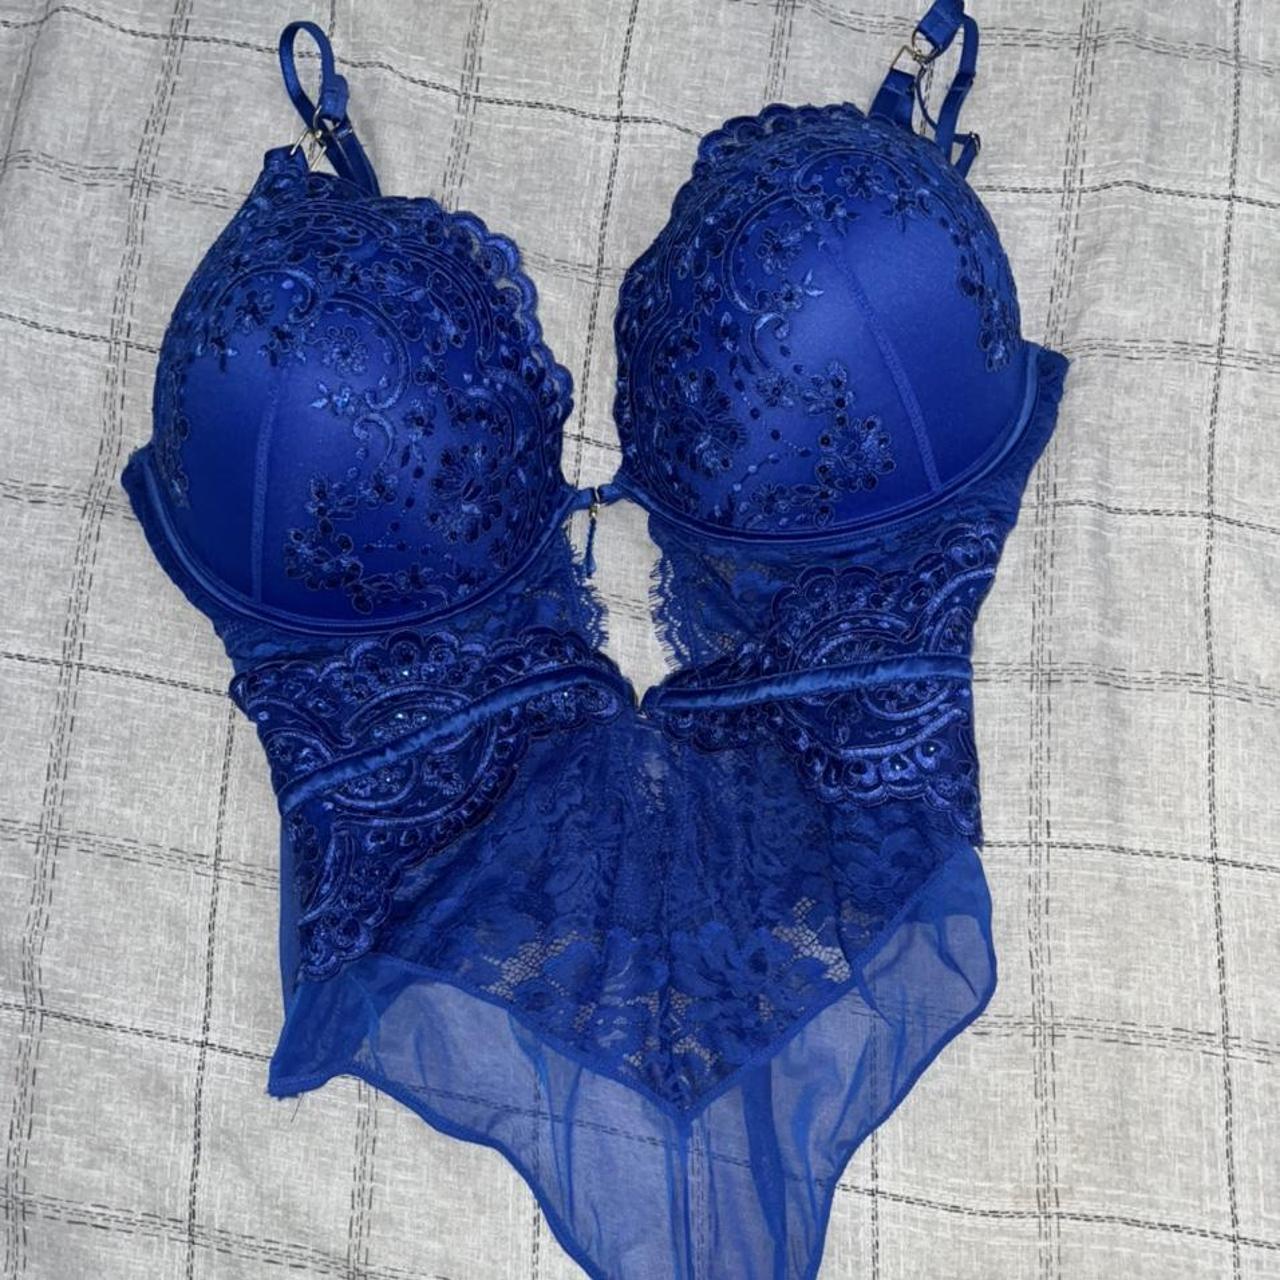 Ann Summers Electric Blue Body size UK22 cup size - Depop